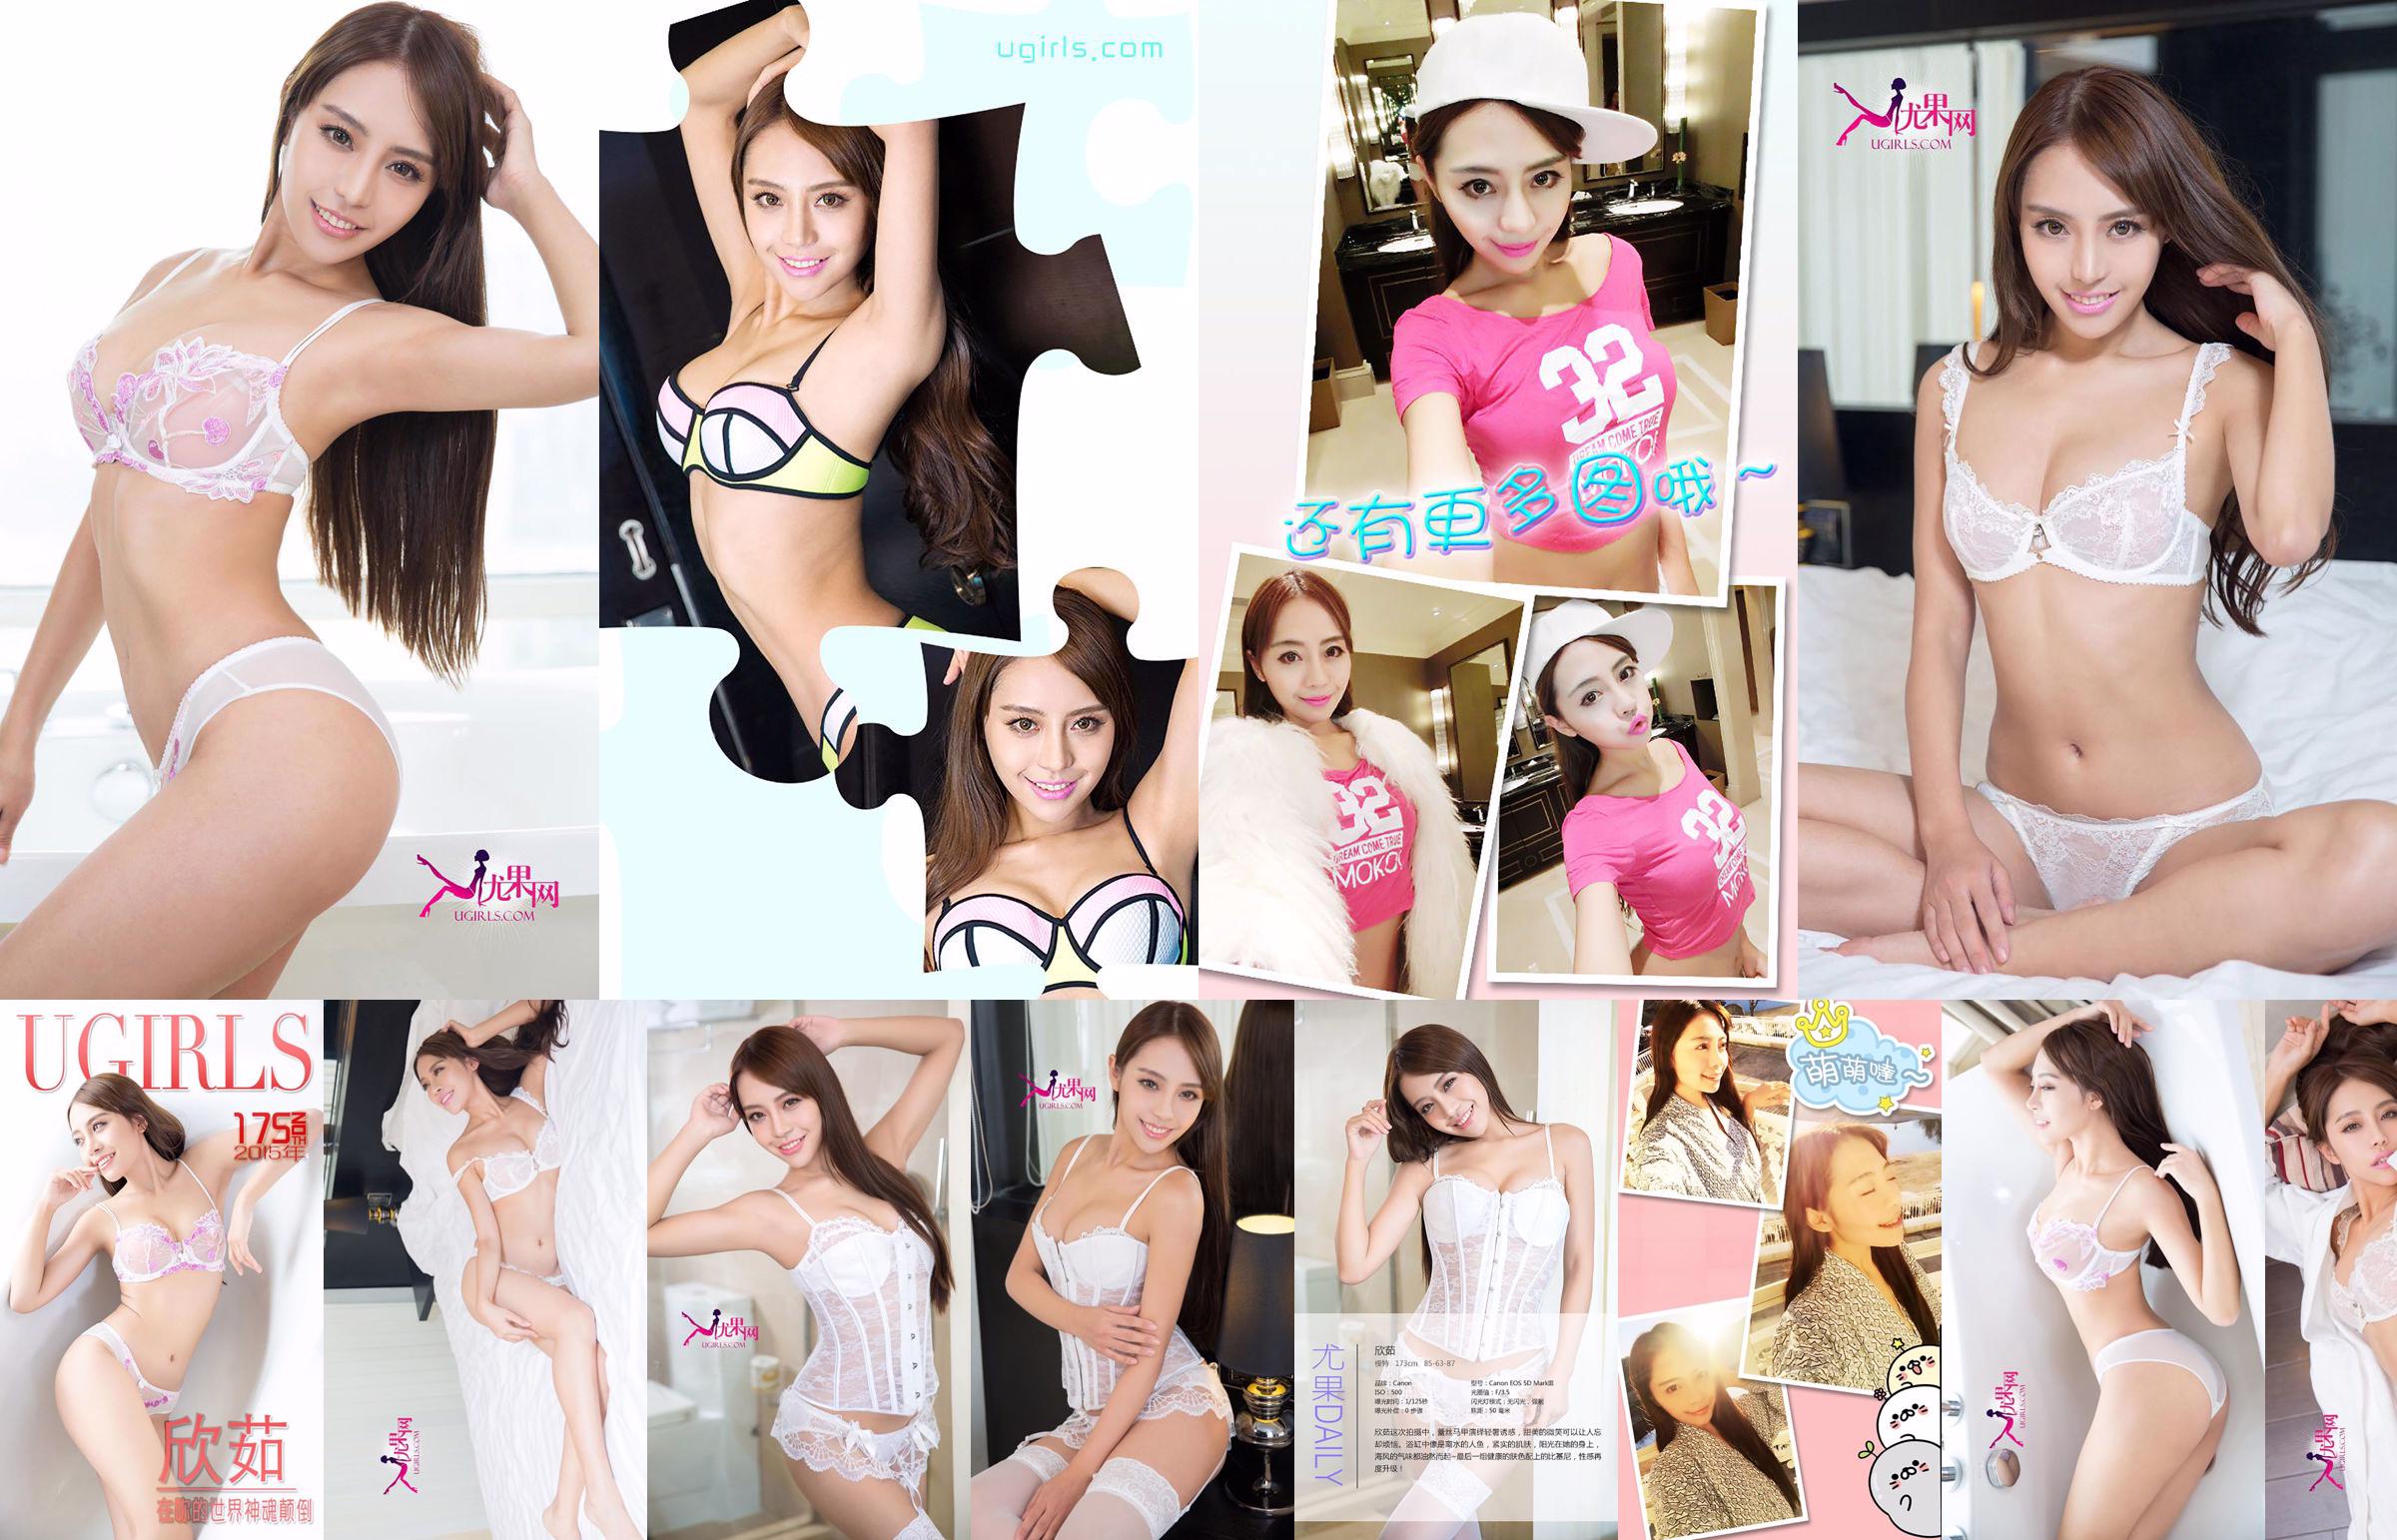 Xinru "In Your World Overheaded" [爱 优 物 Ugirls] No.175 No.104a8a Pagina 4